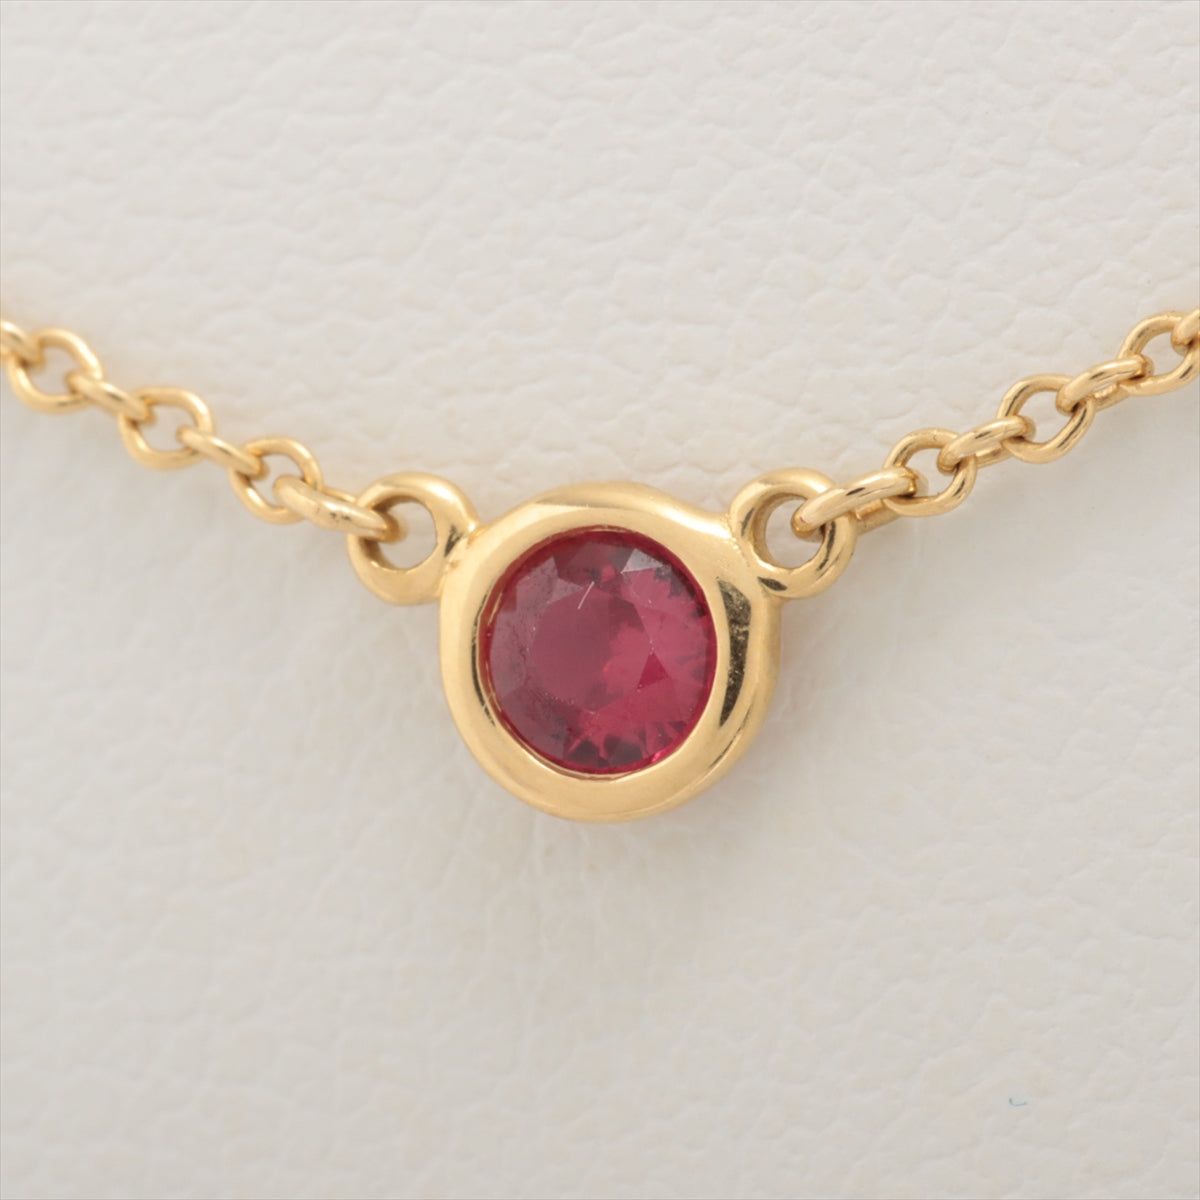 Tiffany Kolor By the Yard Ruby Necklace 750(YG) 1.9g Diameter approx. 4.11 mm